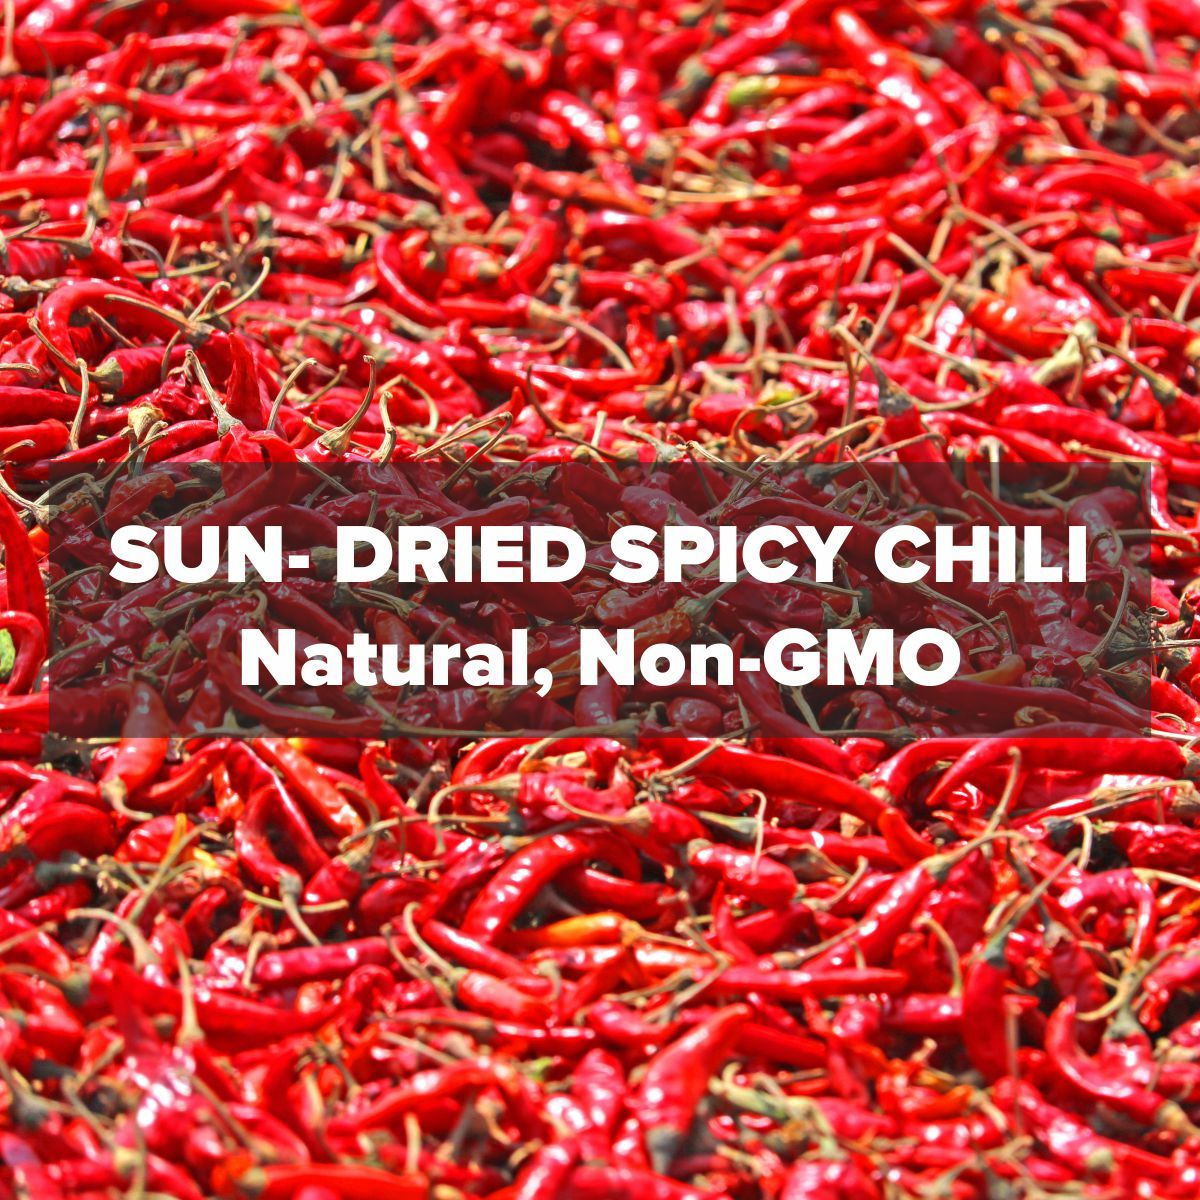 EL The Cook Whole Dried Red Chili Peppers | Spicy Hot Chilli | Natural, Vegan, No Colors, Gluten Free, NON-GMO | Resealable Bag, Sun-Dried | Ideal for Asian, Thai, Indian, Mexican | 7oz (2 x 100gm) (Flavor: Spicy Red Chilly)